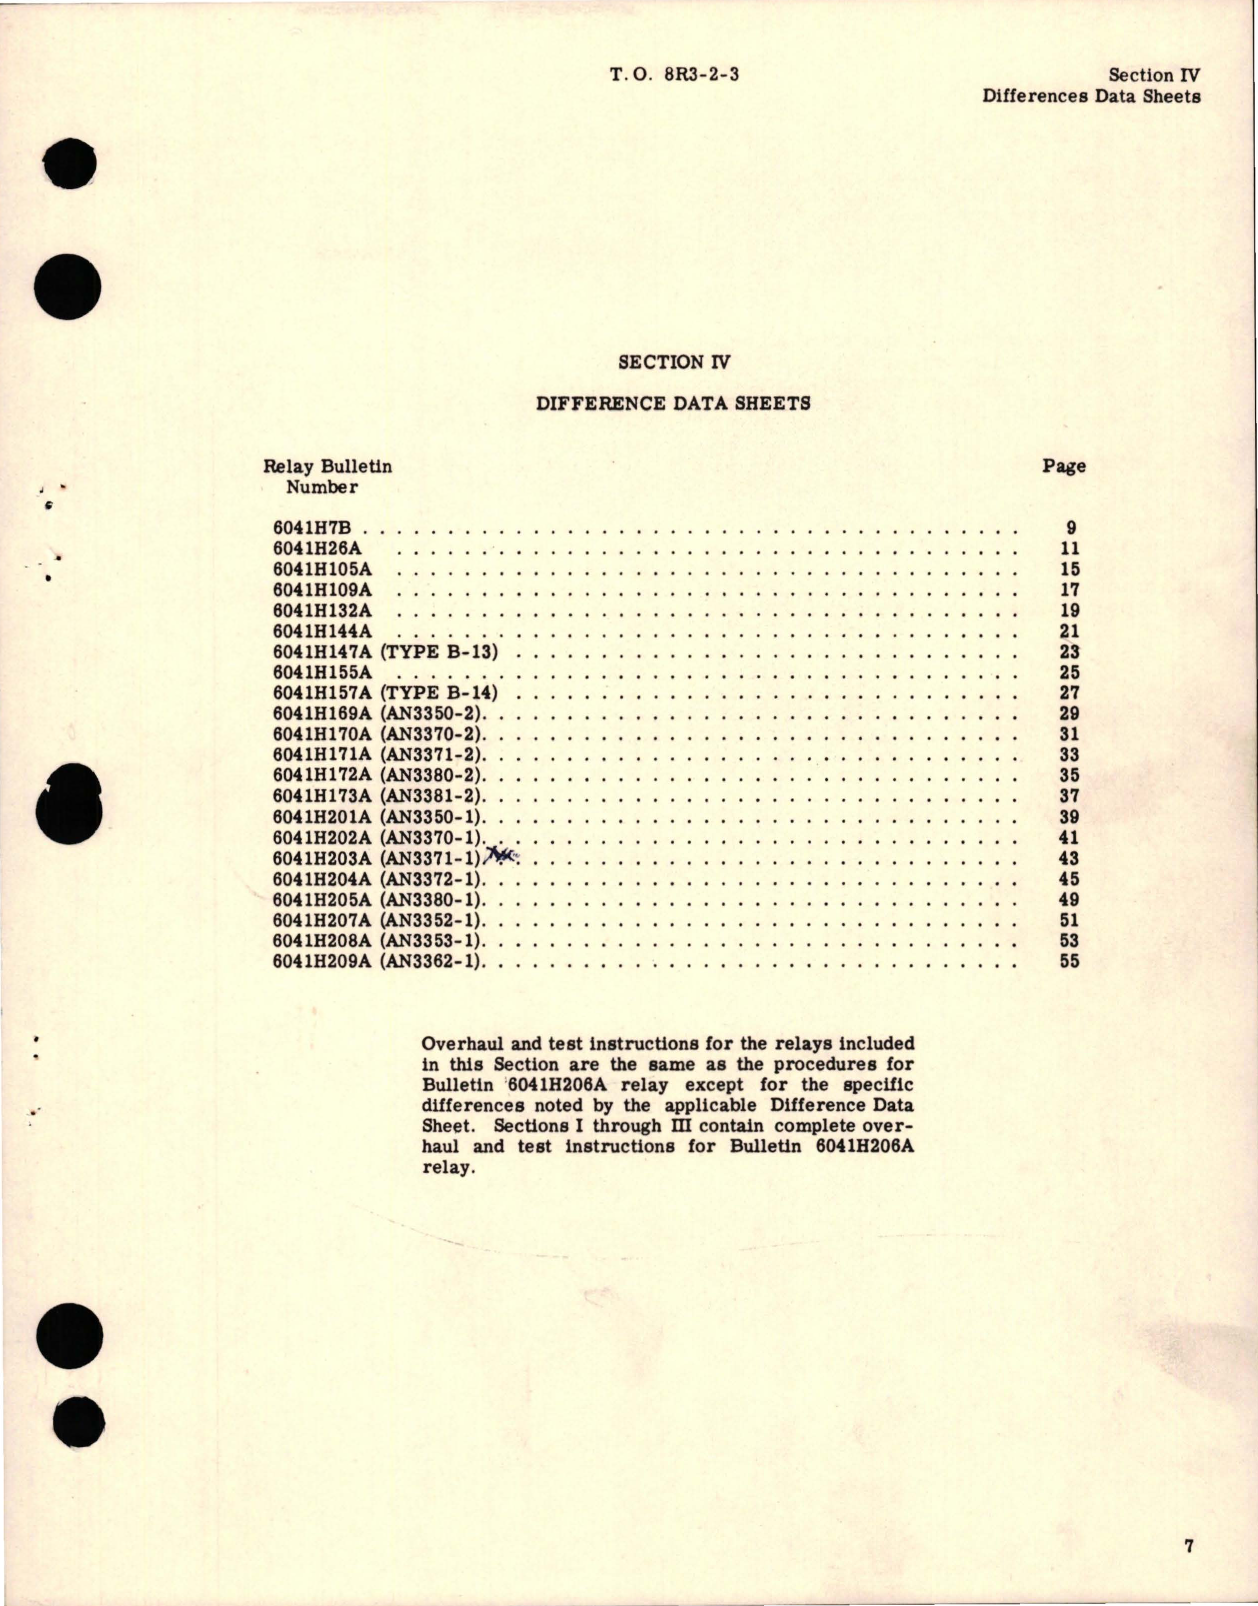 Sample page 9 from AirCorps Library document: Overhaul Instructions for Relays - 6041H Series